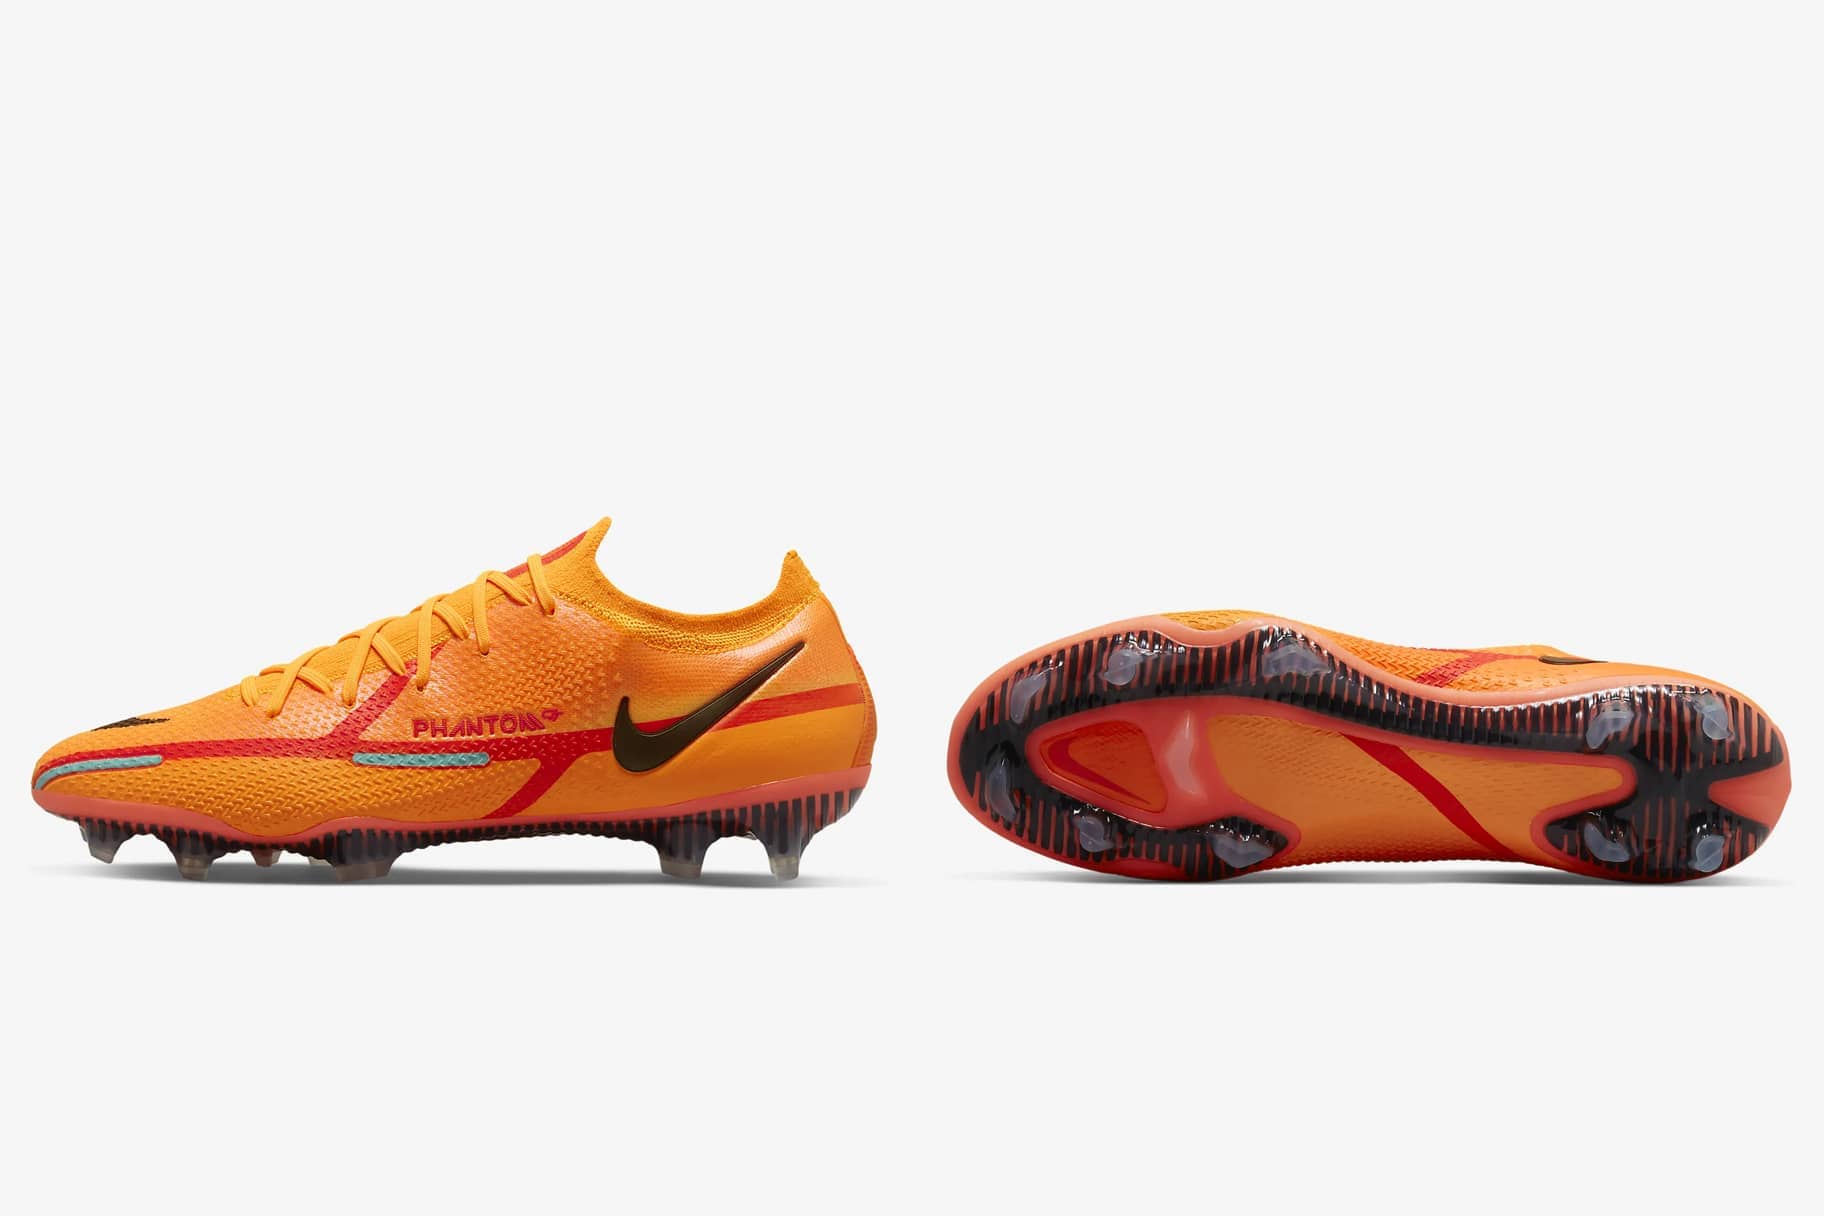 The Best Nike Football Boots. MY